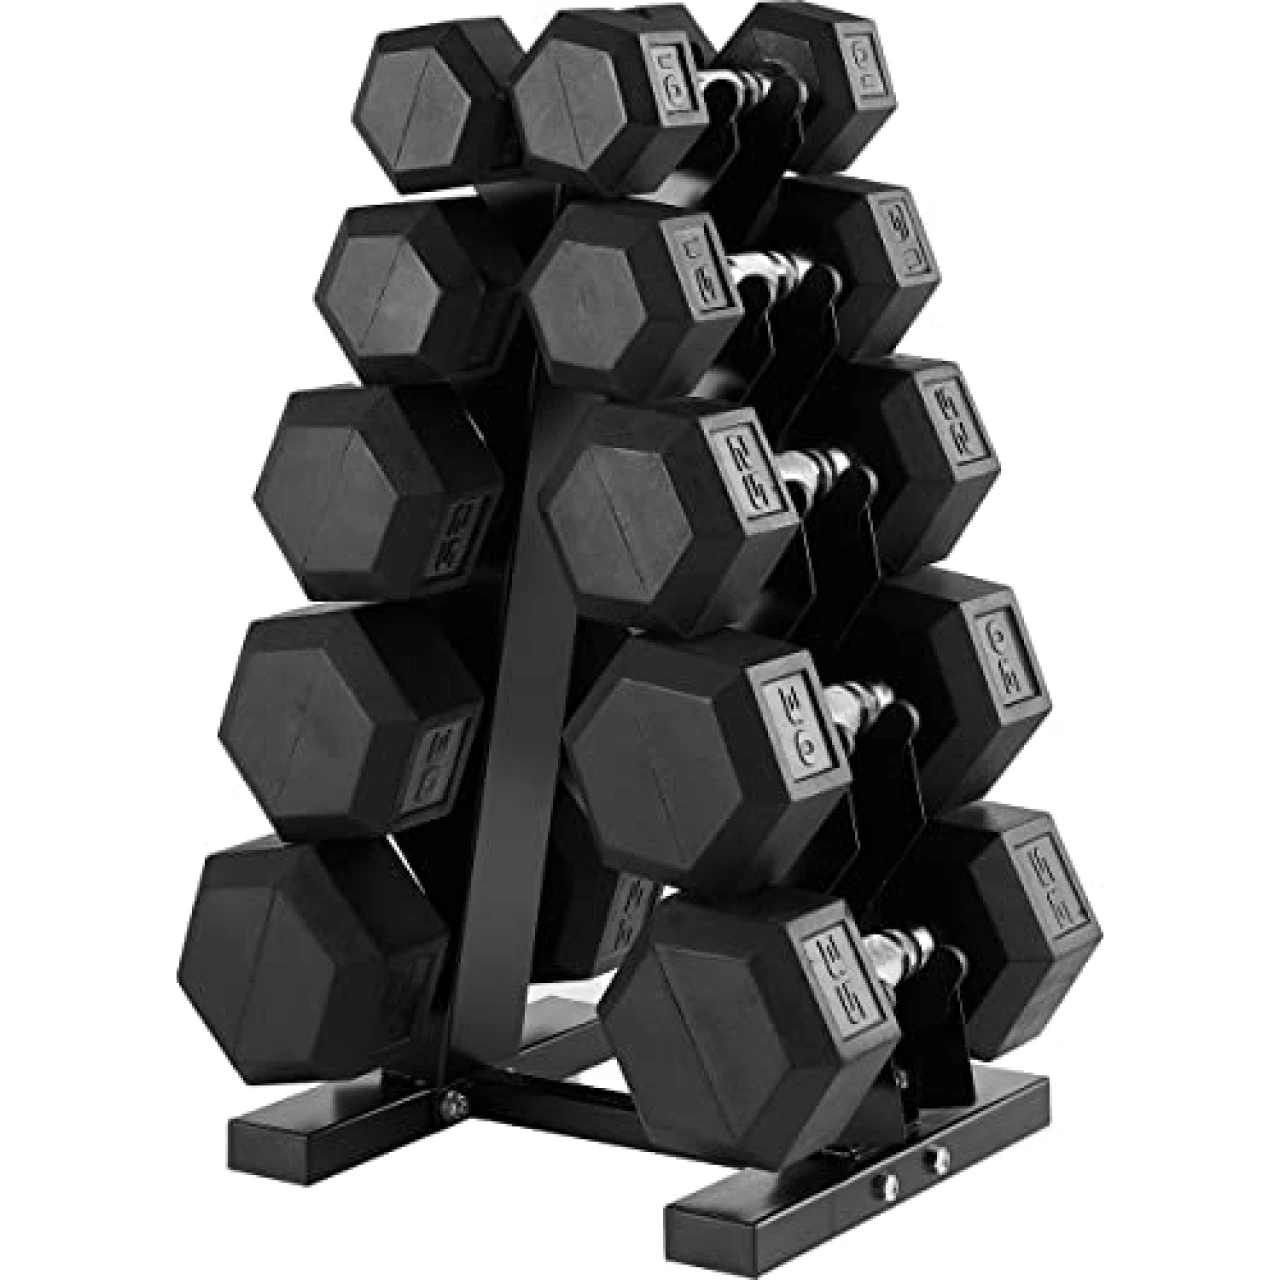 papababe Dumbbell Set Rubber Encased Hex Dumbbell Free Weights Dumbbells Set Home Weight Set(A Pair of 10 15 25 30 35 LB Dumbbell with Rack)